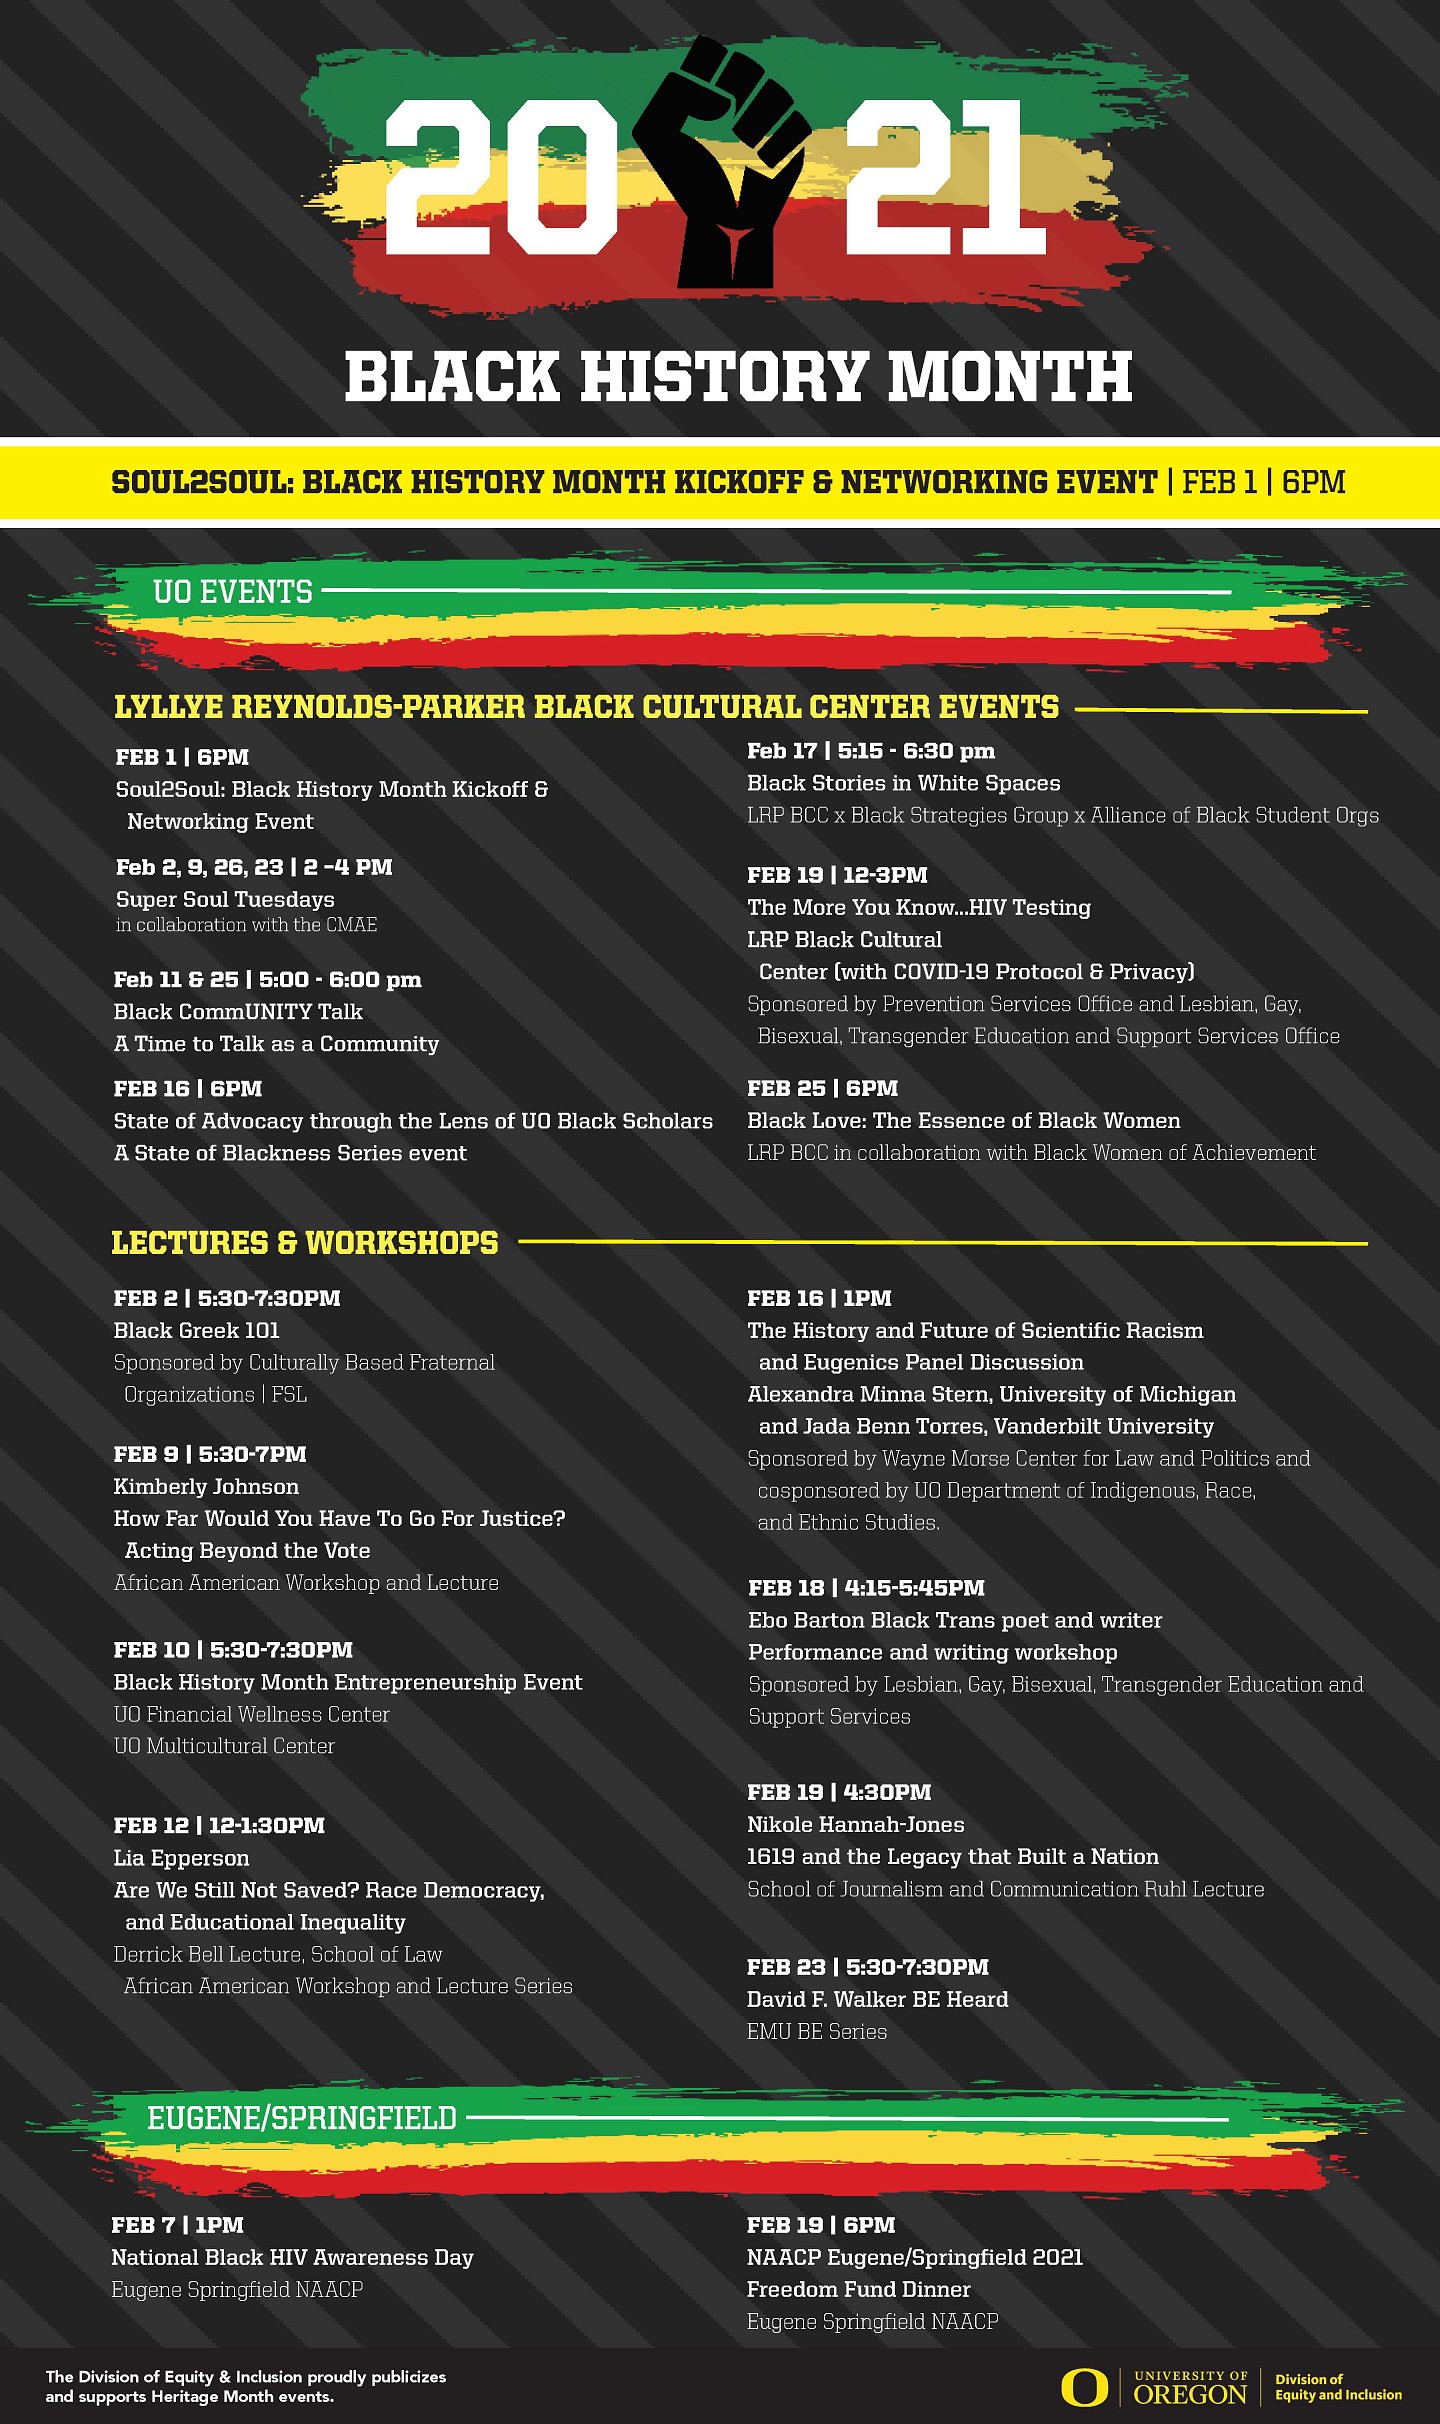 Black History Month 2021 list of events also listed in timeline black fist on red/yellow/green stripe